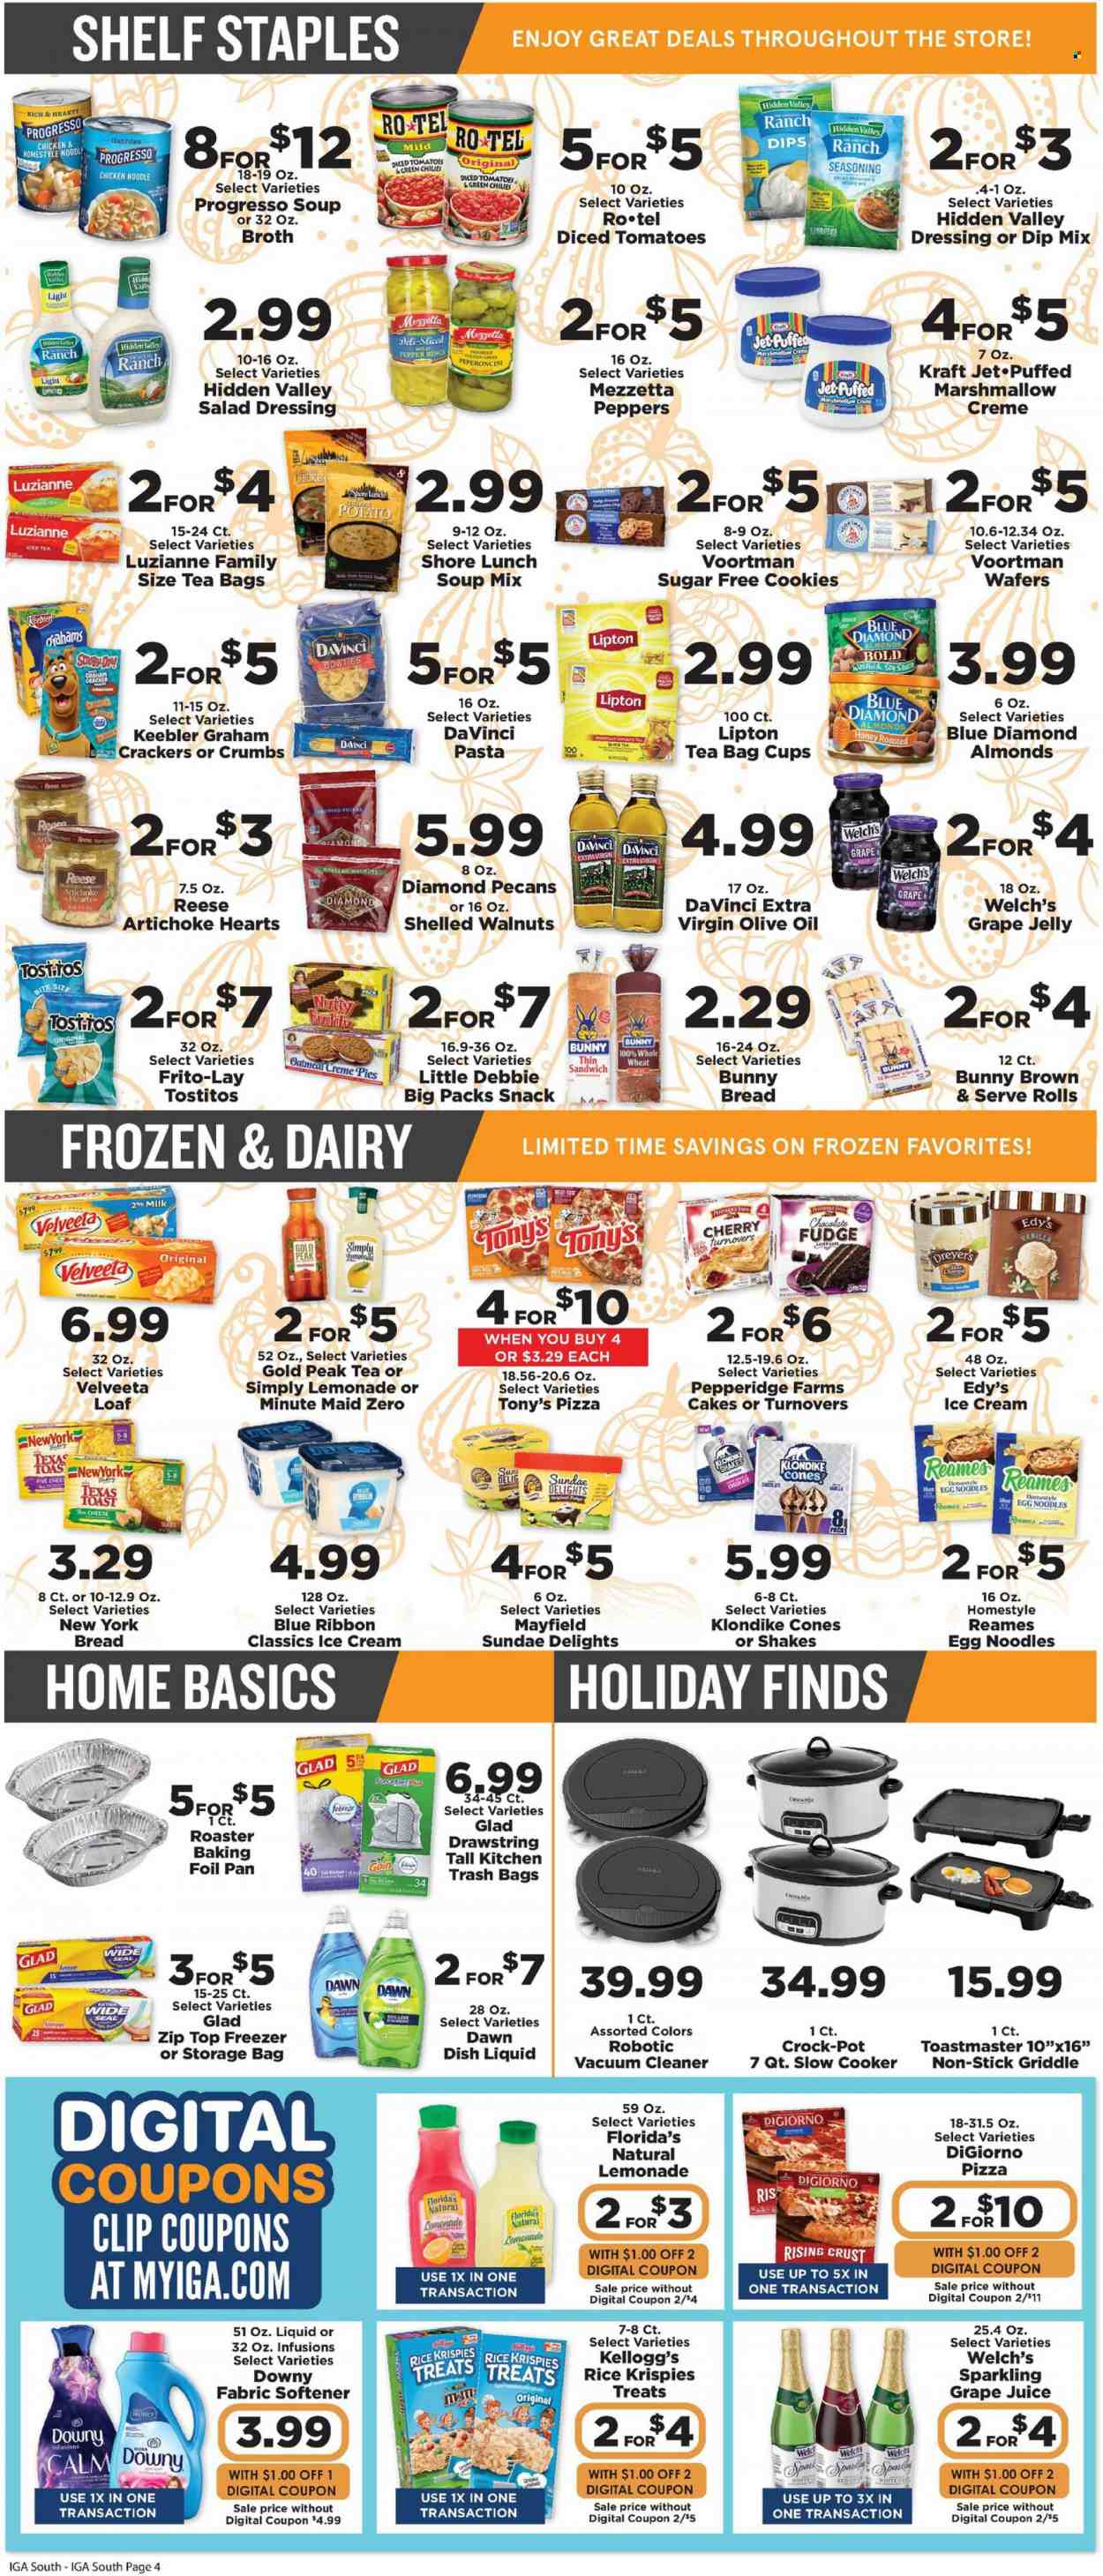 thumbnail - IGA Flyer - 11/17/2021 - 11/30/2021 - Sales products - bread, cake, turnovers, artichoke, cherries, Welch's, pizza, sandwich, soup mix, pasta, sauce, noodles, Progresso, Kraft®, milk, shake, dip, ice cream, cookies, fudge, marshmallows, wafers, snack, jelly, crackers, Kellogg's, Florida's Natural, Keebler, Frito-Lay, Tostitos, oatmeal, broth, Rice Krispies, egg noodles, pepper, spice, salad dressing, soy sauce, dressing, olive oil, oil, grape jelly, honey, almonds, walnuts, pecans, Blue Diamond, lemonade, juice, Lipton, Gold Peak Tea, fruit punch, green tea, tea bags, beer, Febreze, Gain, fabric softener, Downy Laundry, dishwashing liquid, Jet, trash bags, storage bag, pot, pan, cup. Page 4.